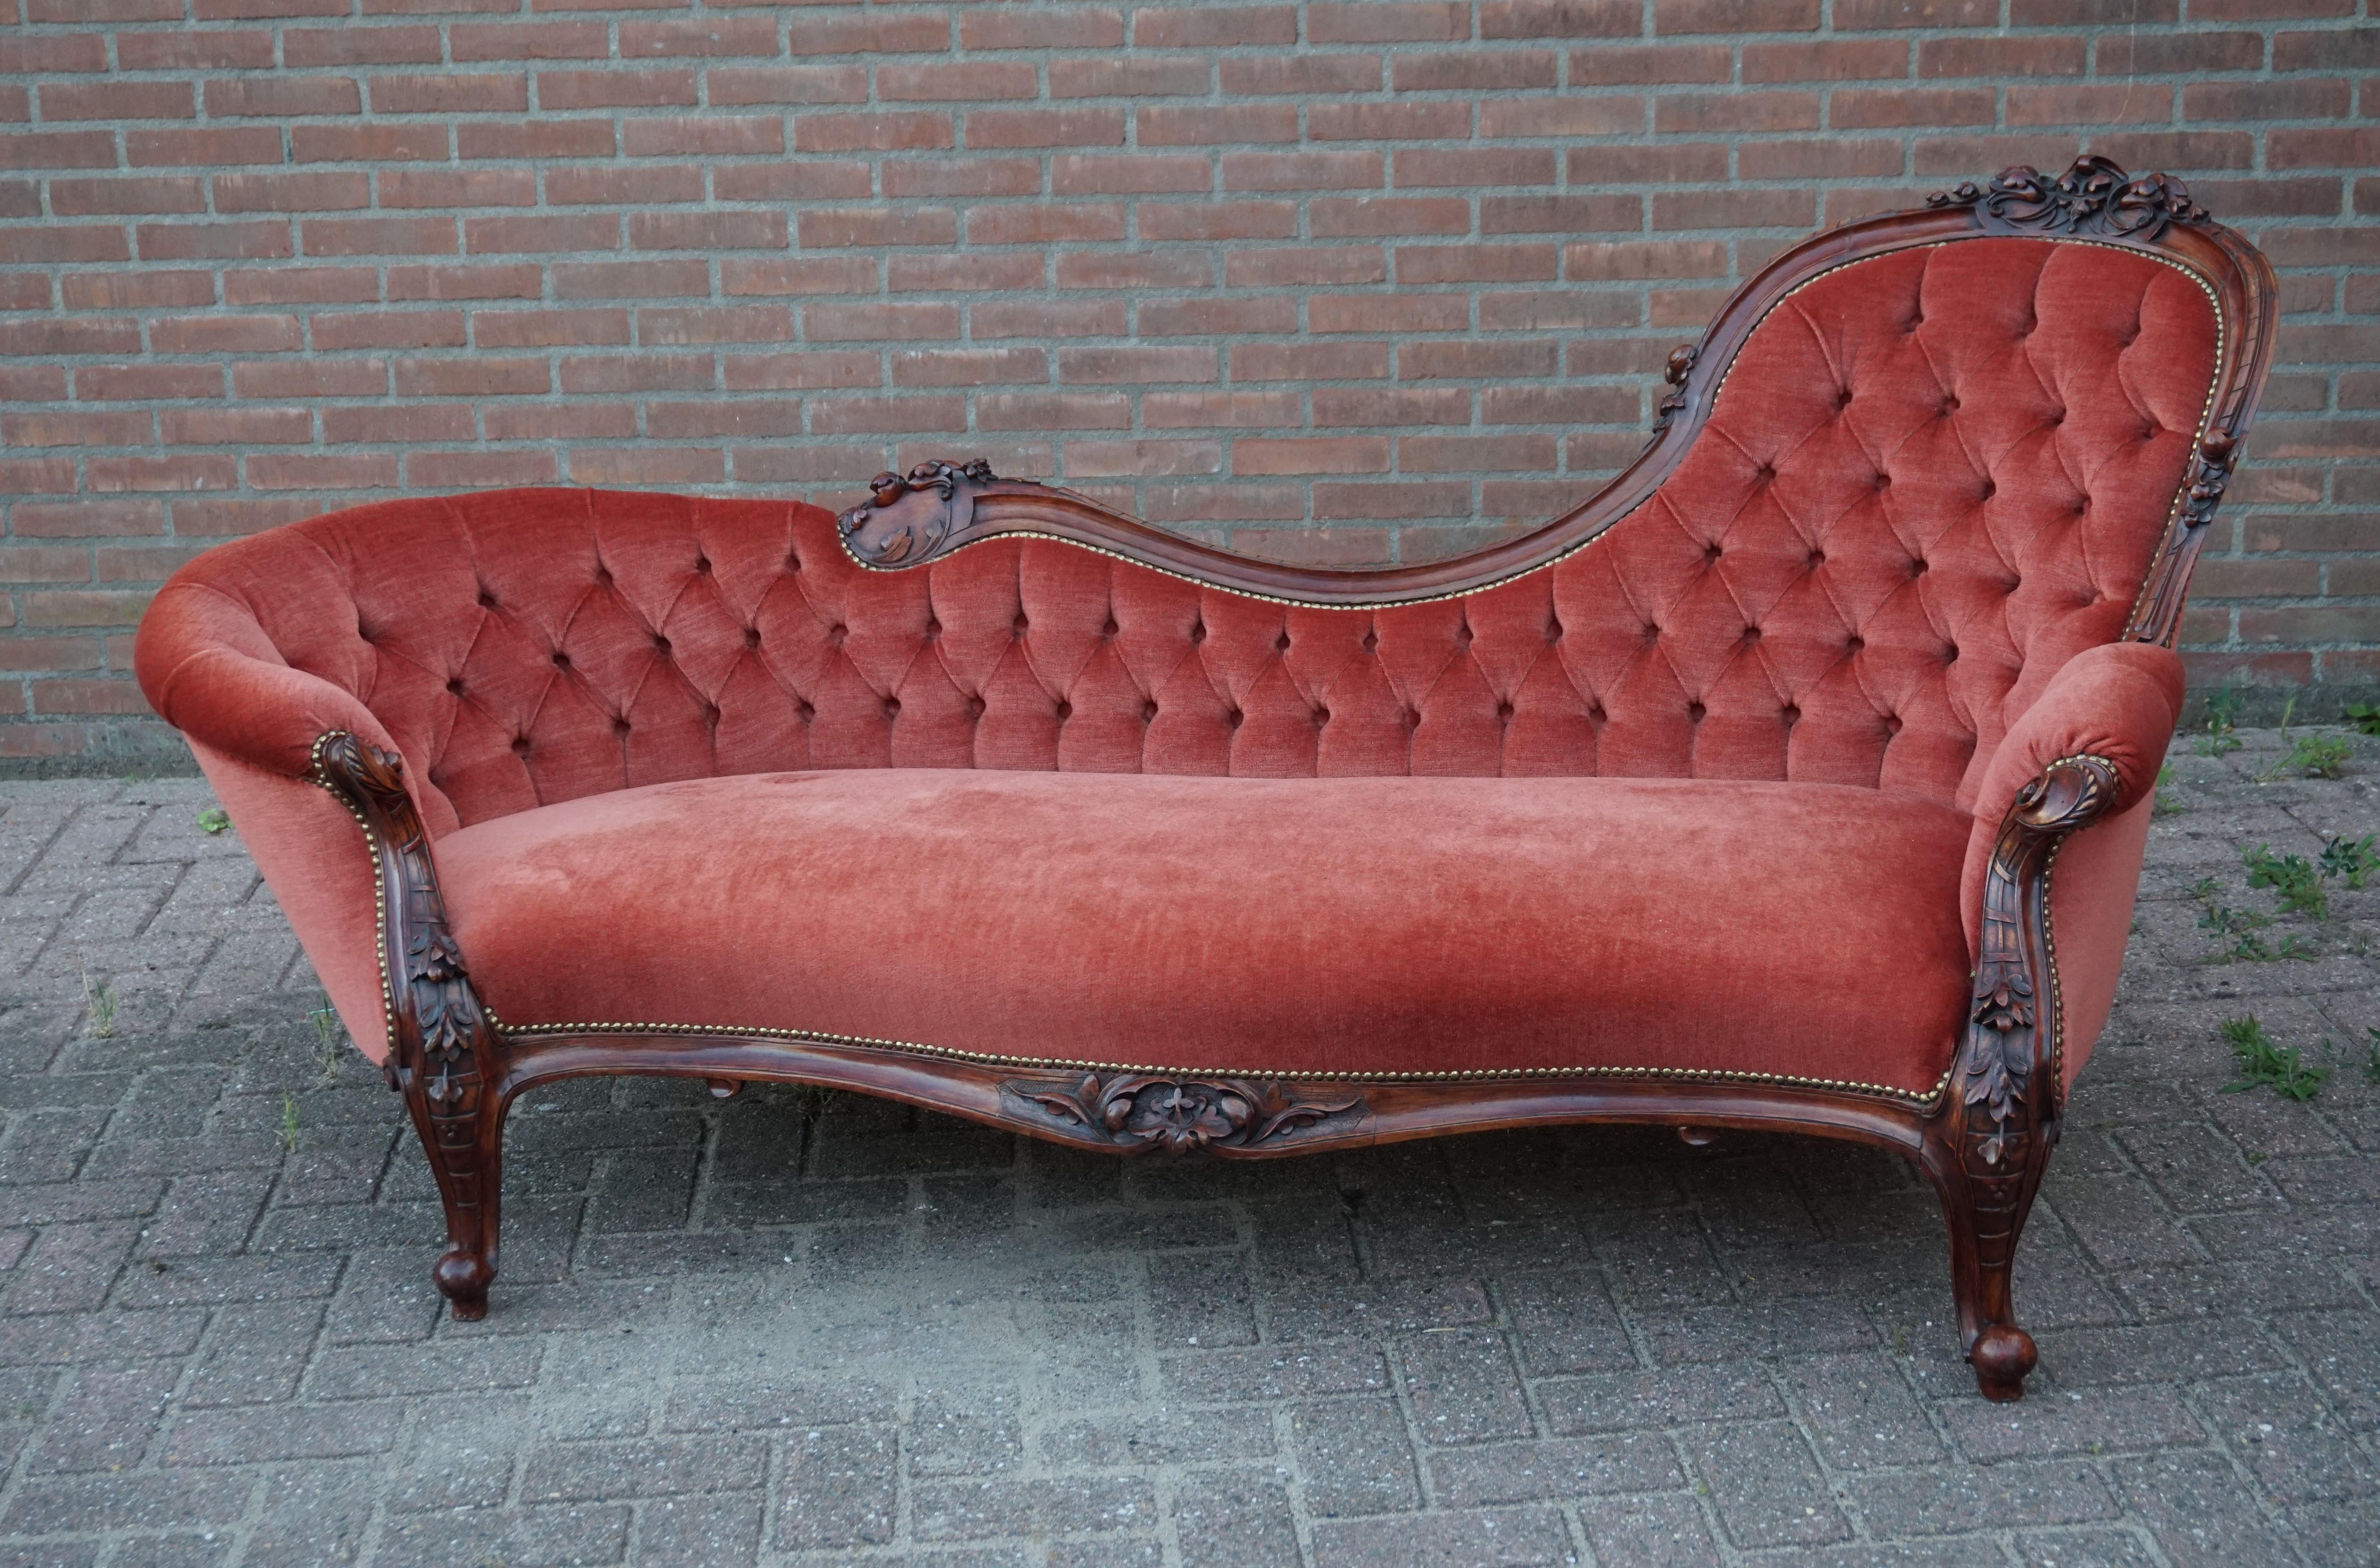 Incredibly stylish and very well made chaise lounge with perfect upholstery.

This is the most amazing design, the most comfortable, the best quality made and the best condition antique chaise lounge that we ever had the pleasure of offering. After